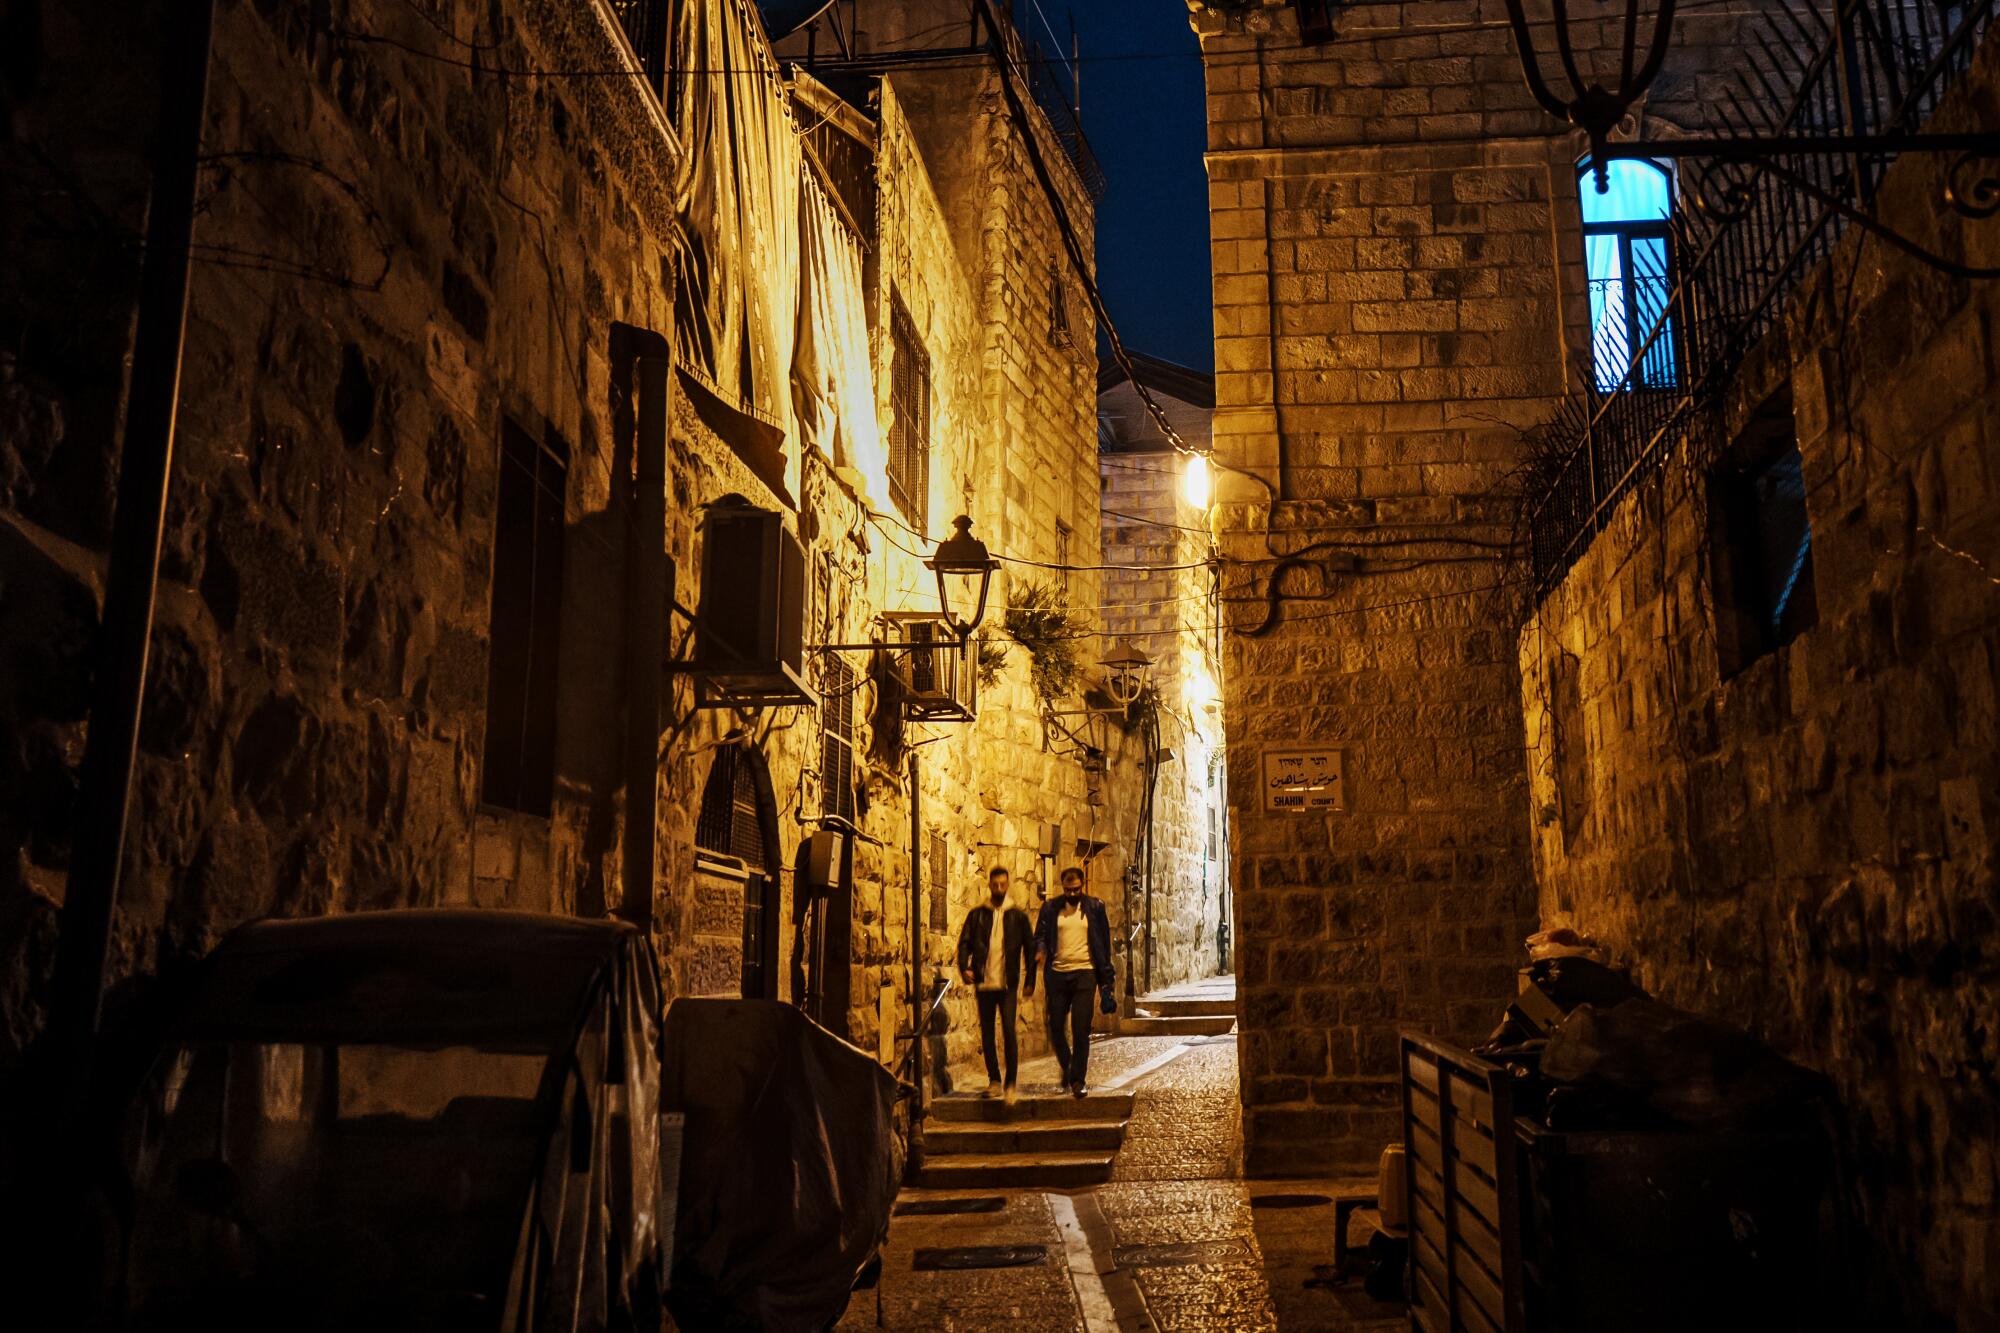 Two people walk through an alleyway.